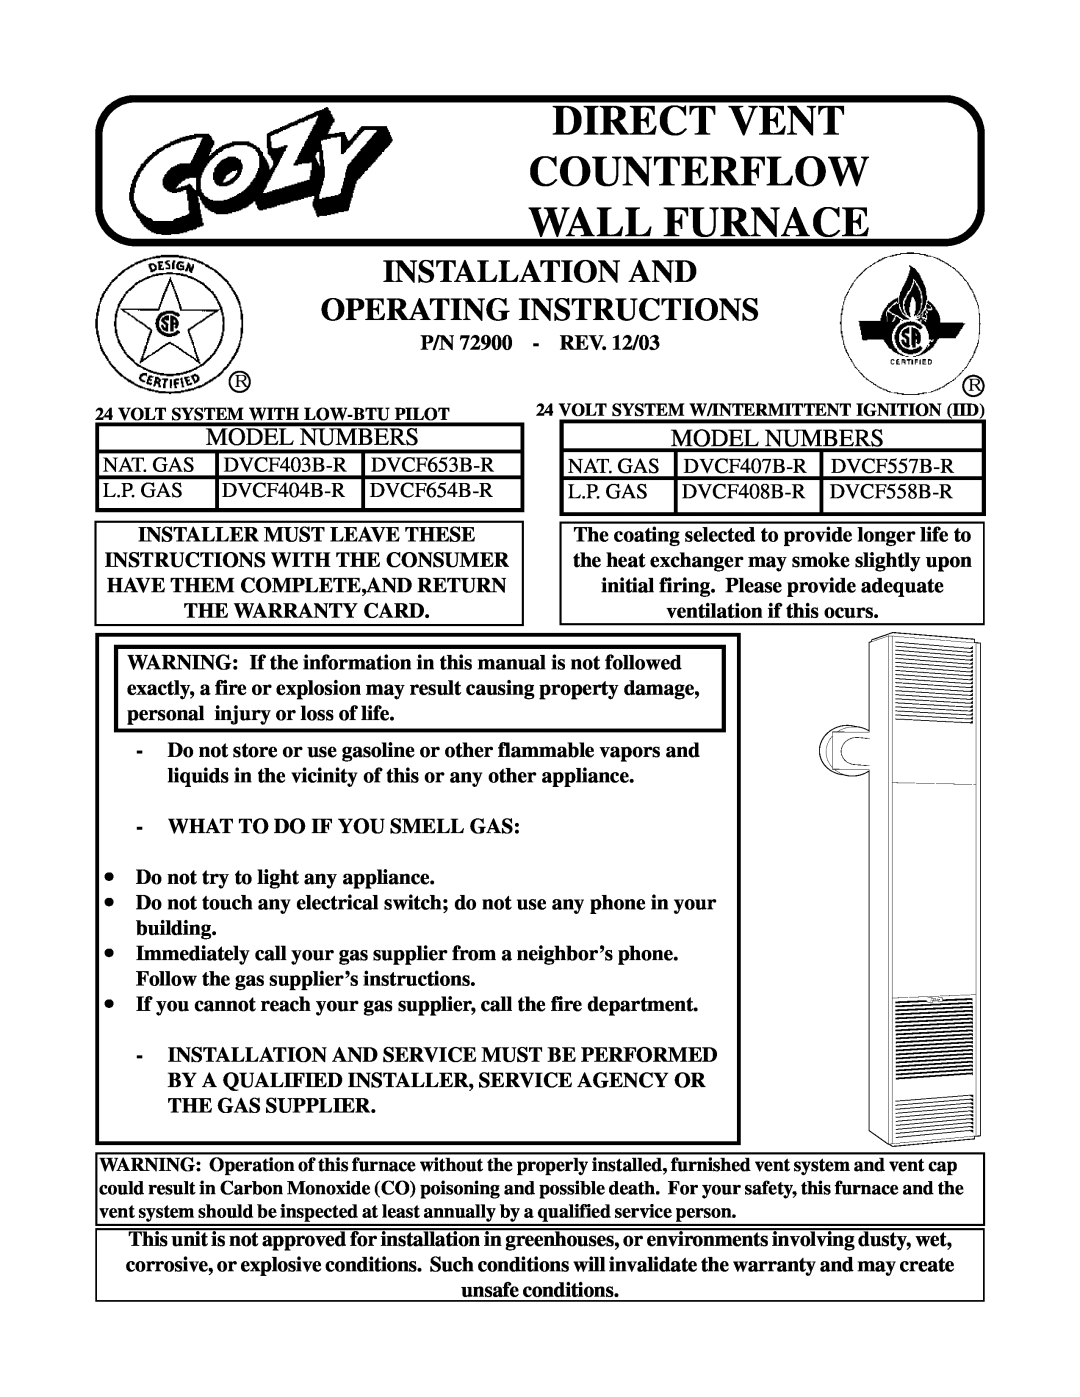 Louisville Tin and Stove DVCF404B-R warranty Direct Vent Counterflow Wall Furnace, Installation And Operating Instructions 